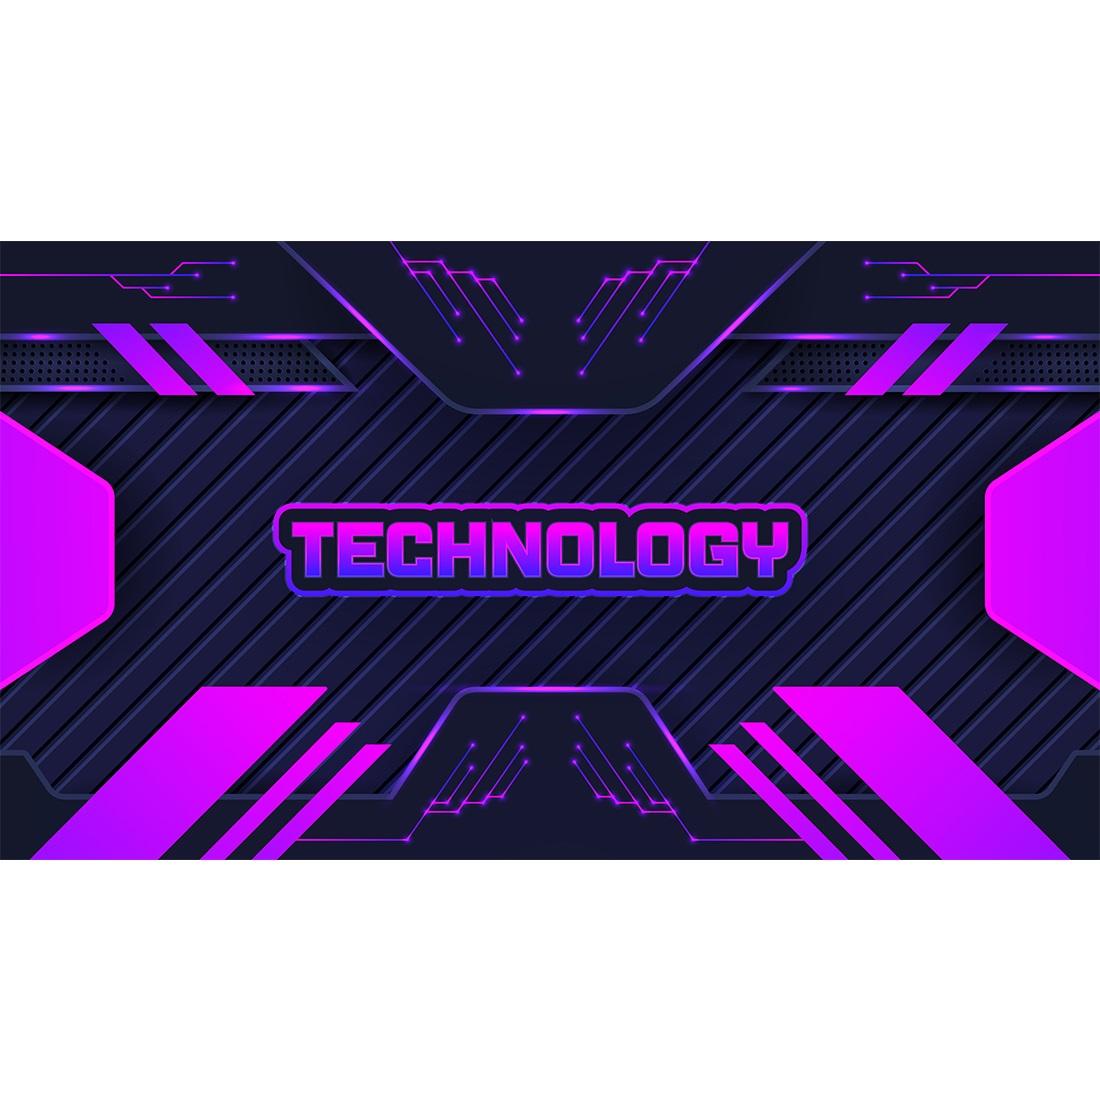 Technology Background Design With Editable Text Effect cover image.